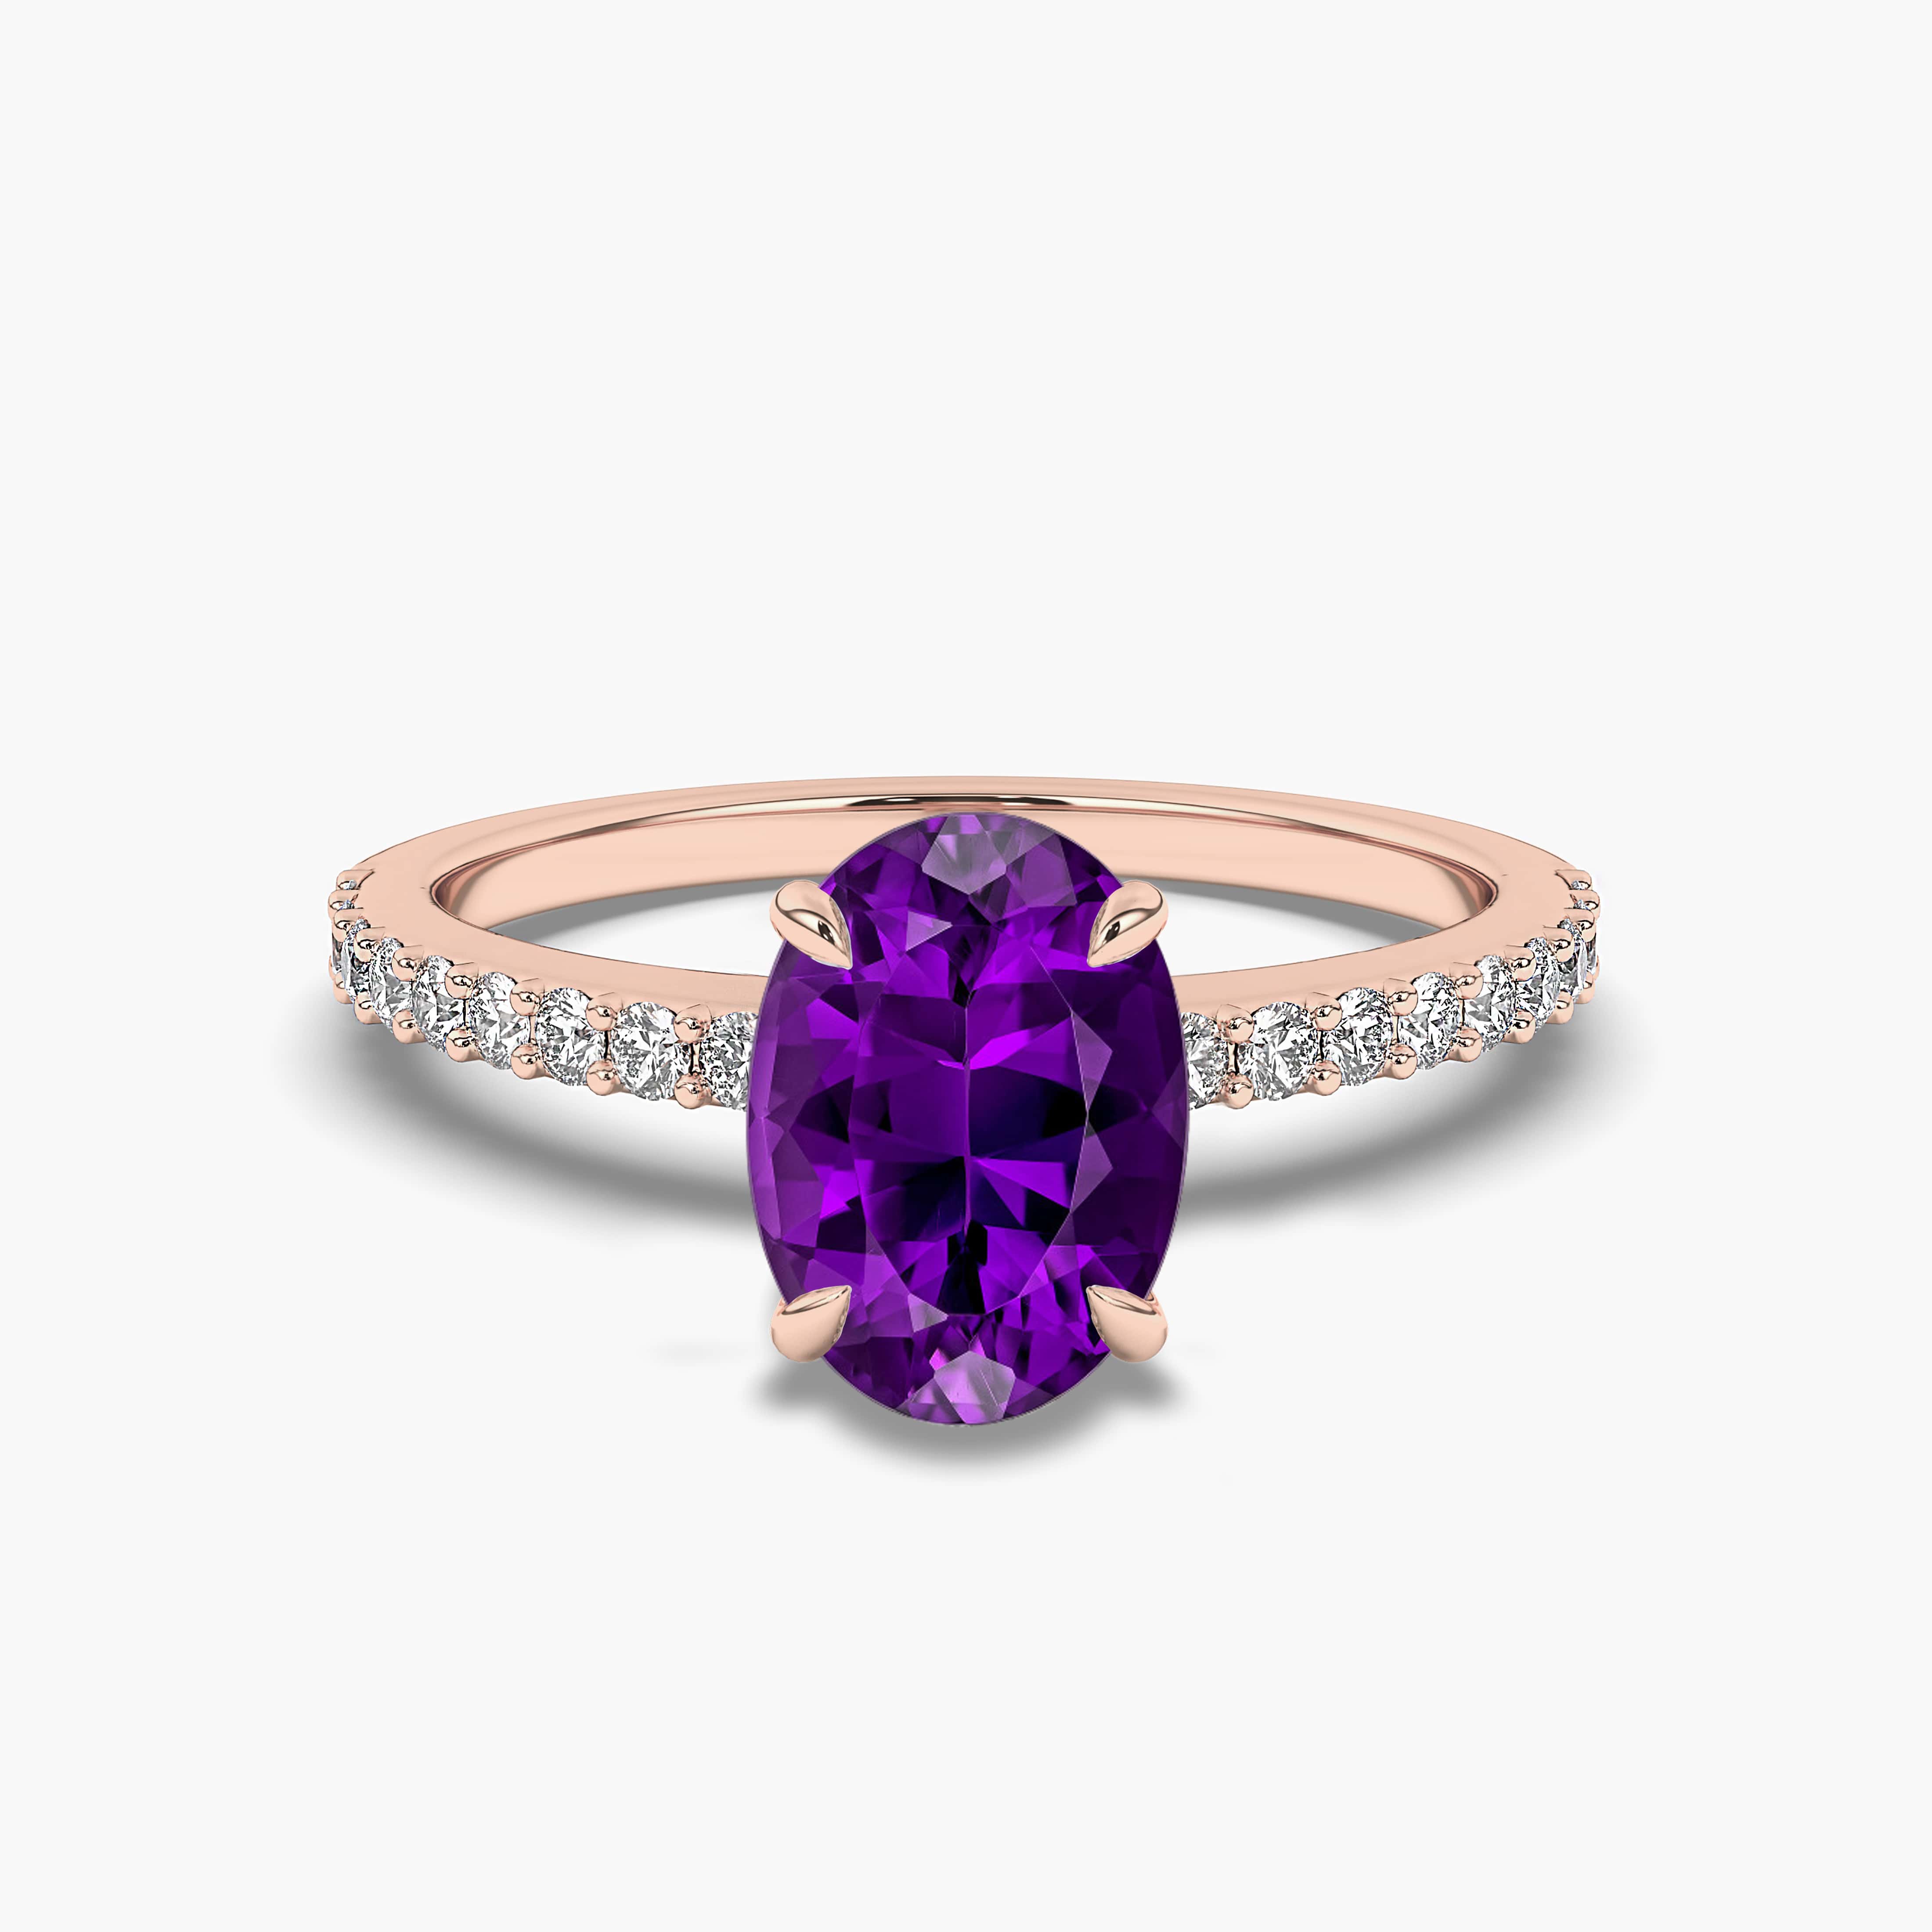 OVAL AMETHYST & DIAMOND ENGAGEMENT RING ROSE GOLD